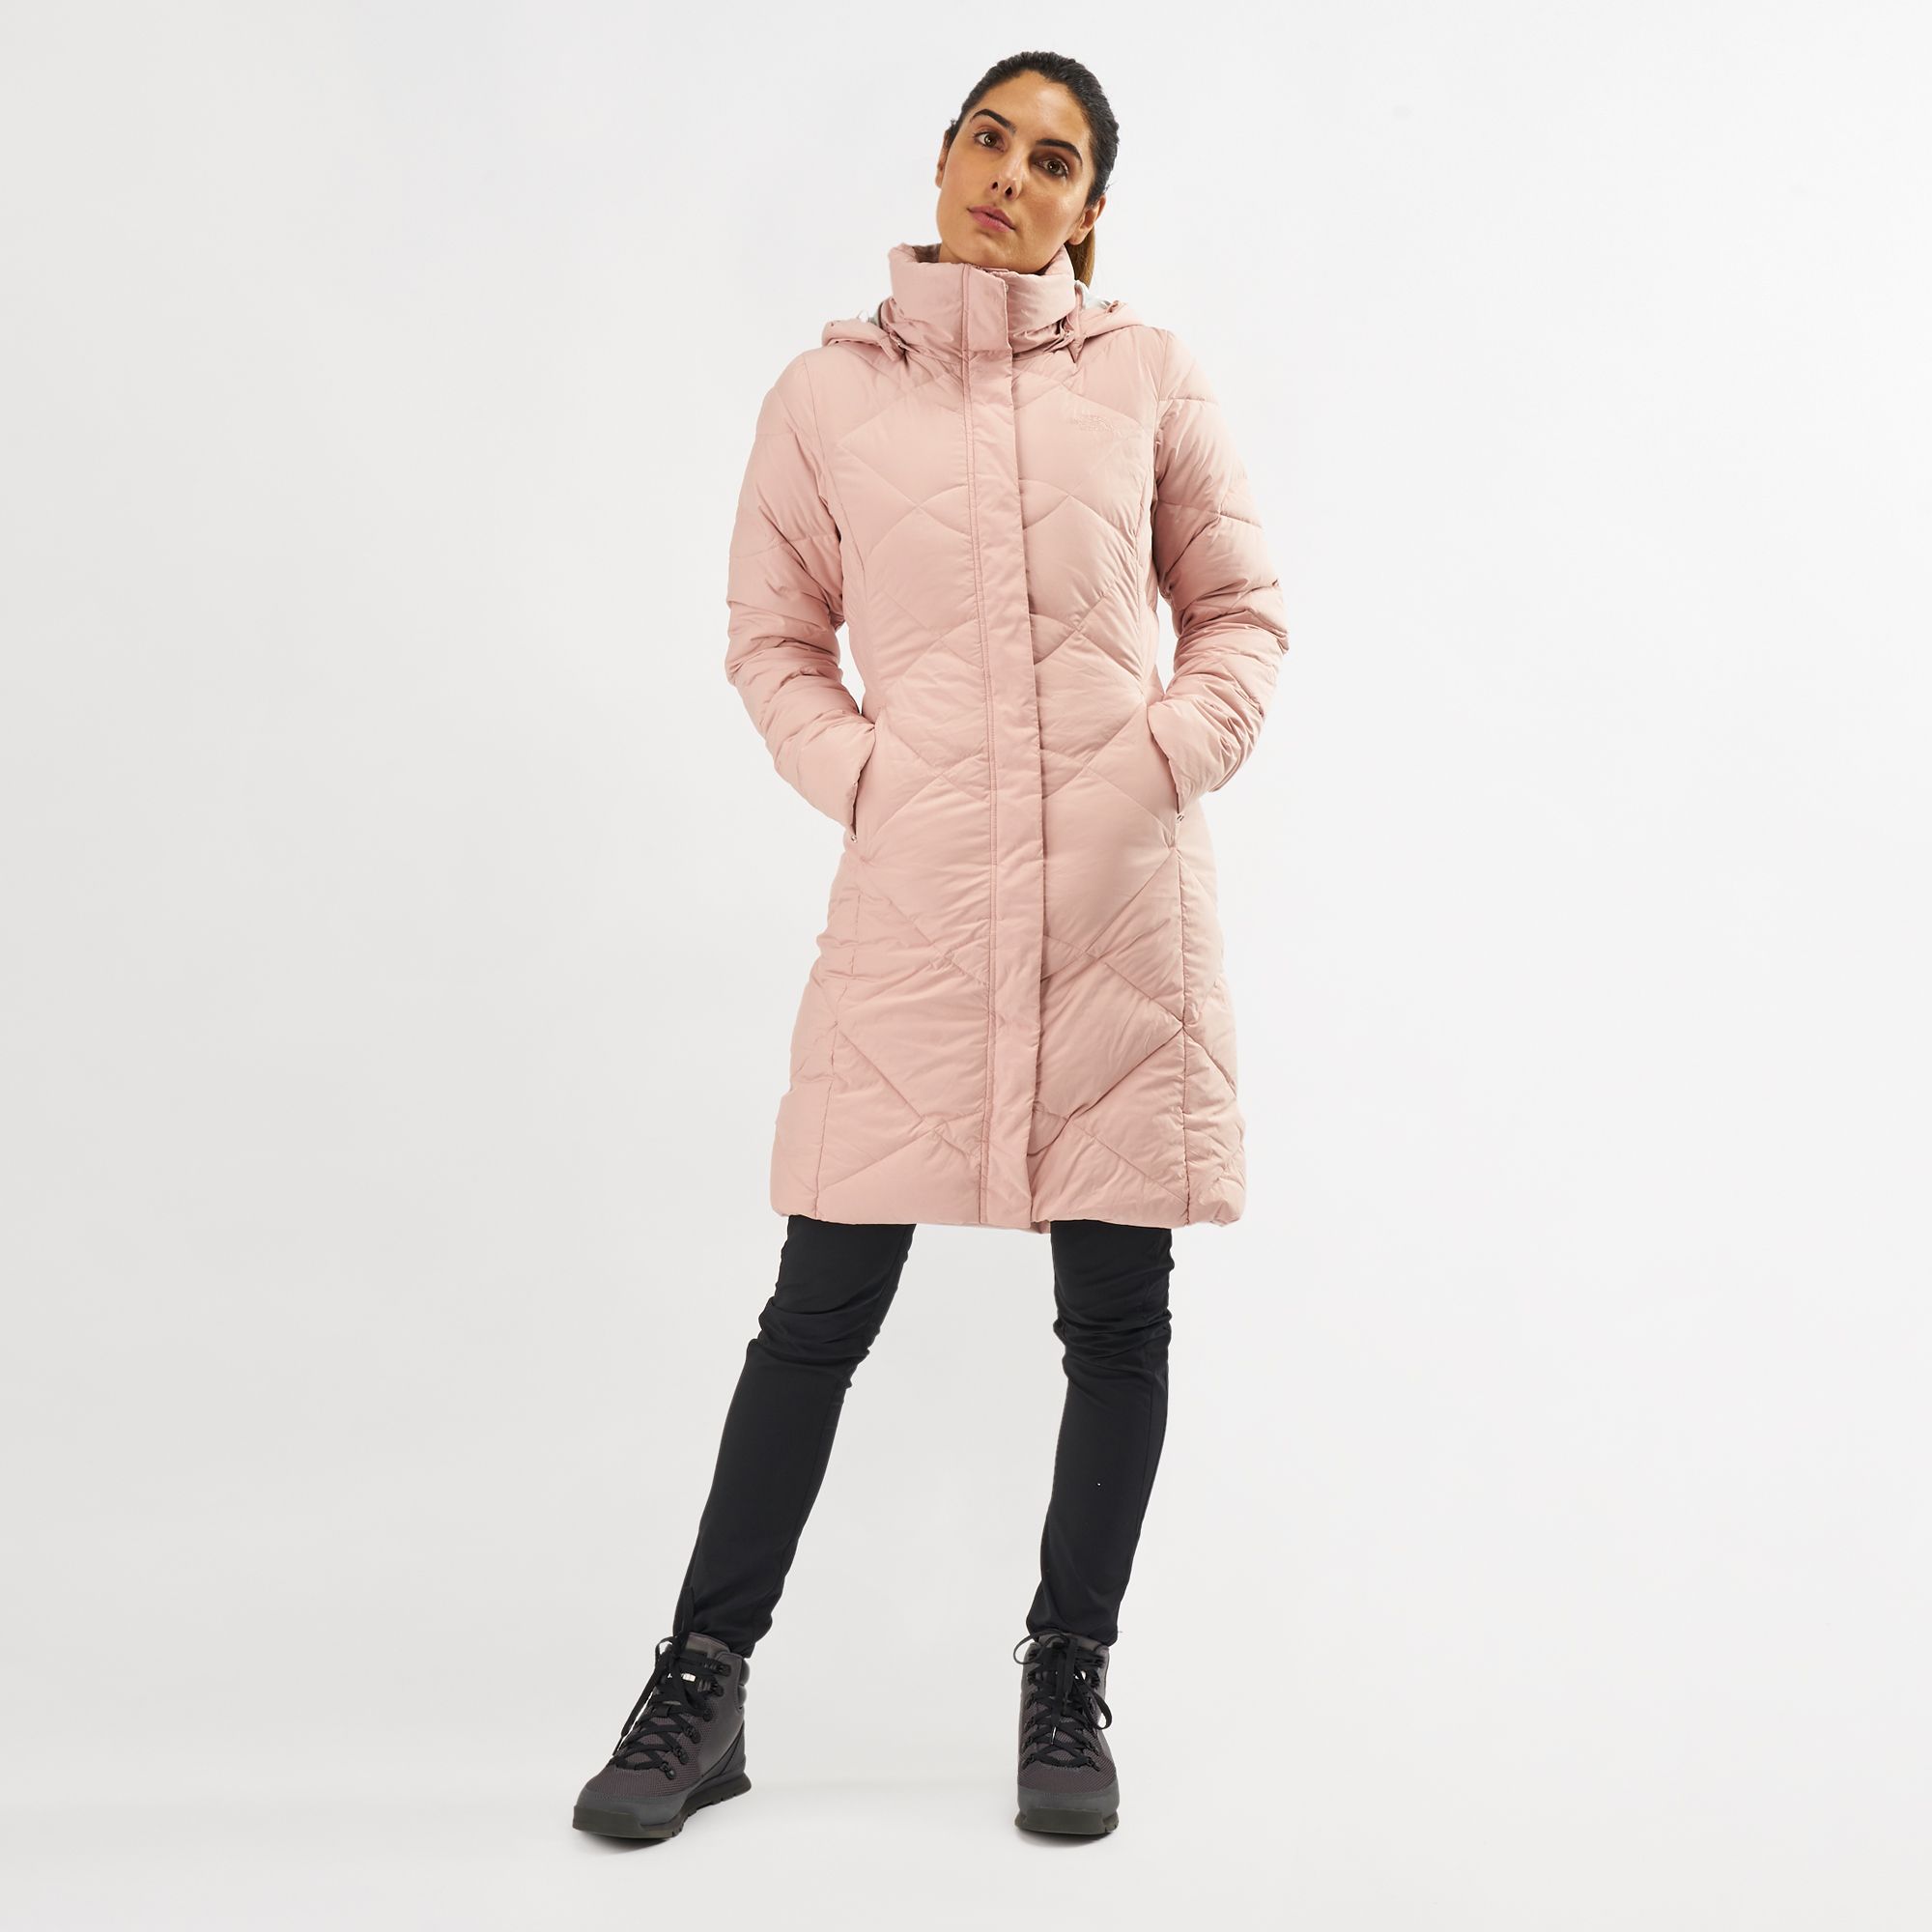 the north face women's miss metro parka